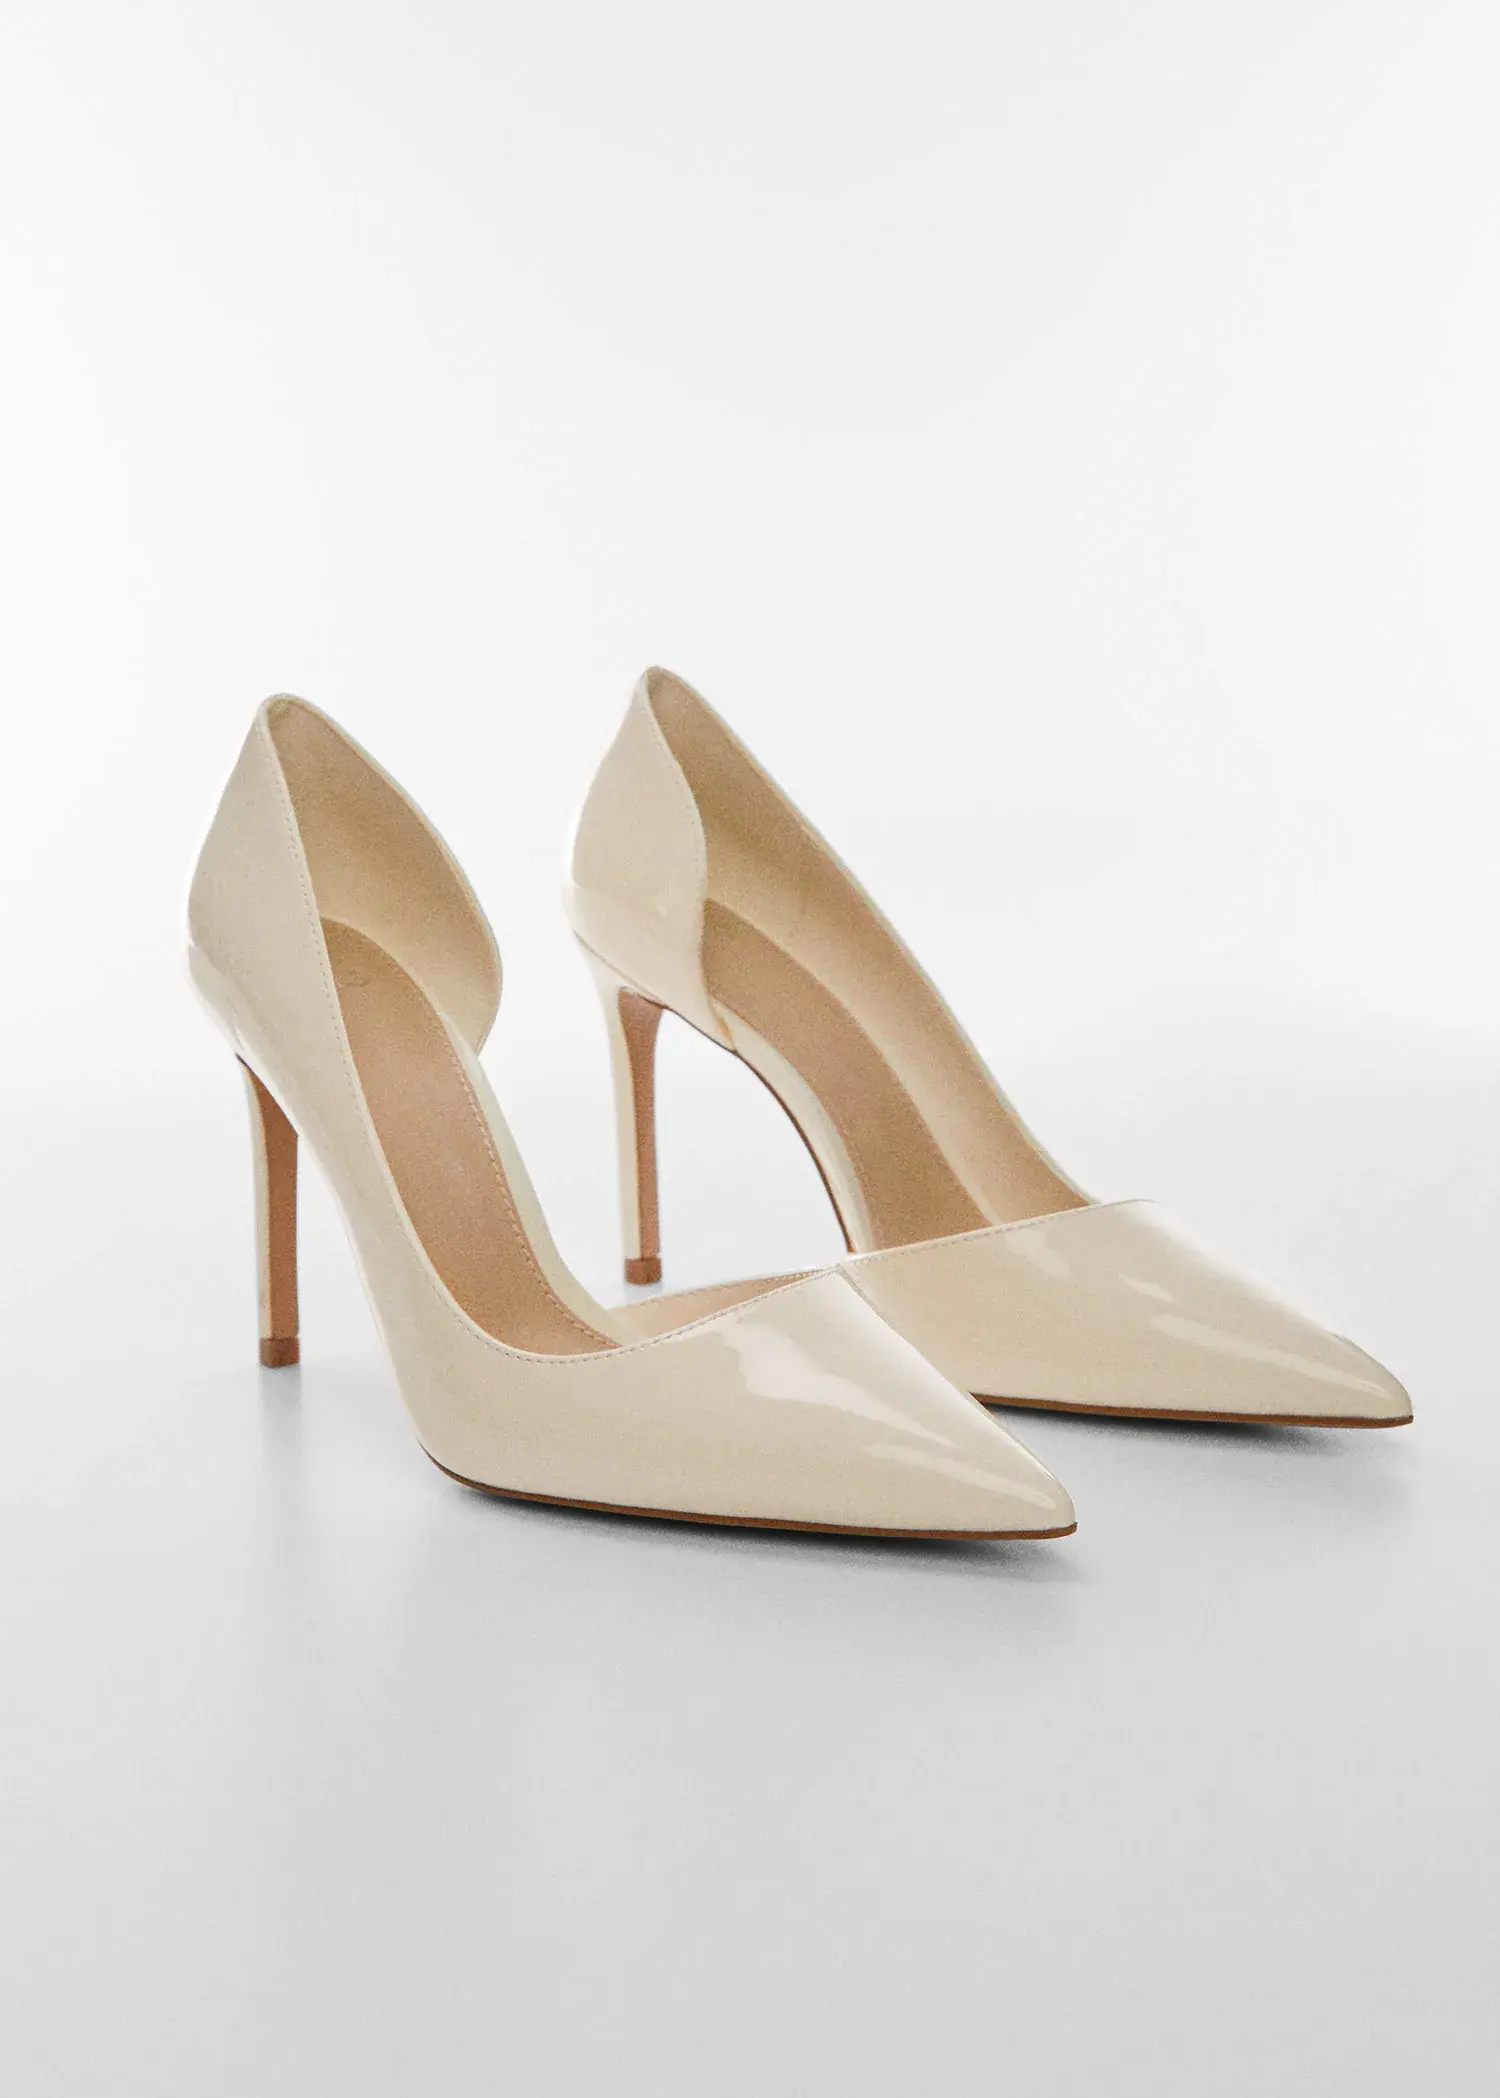 Mango Asymmetrical heeled shoes. a close up of a pair of shoes on a white surface 